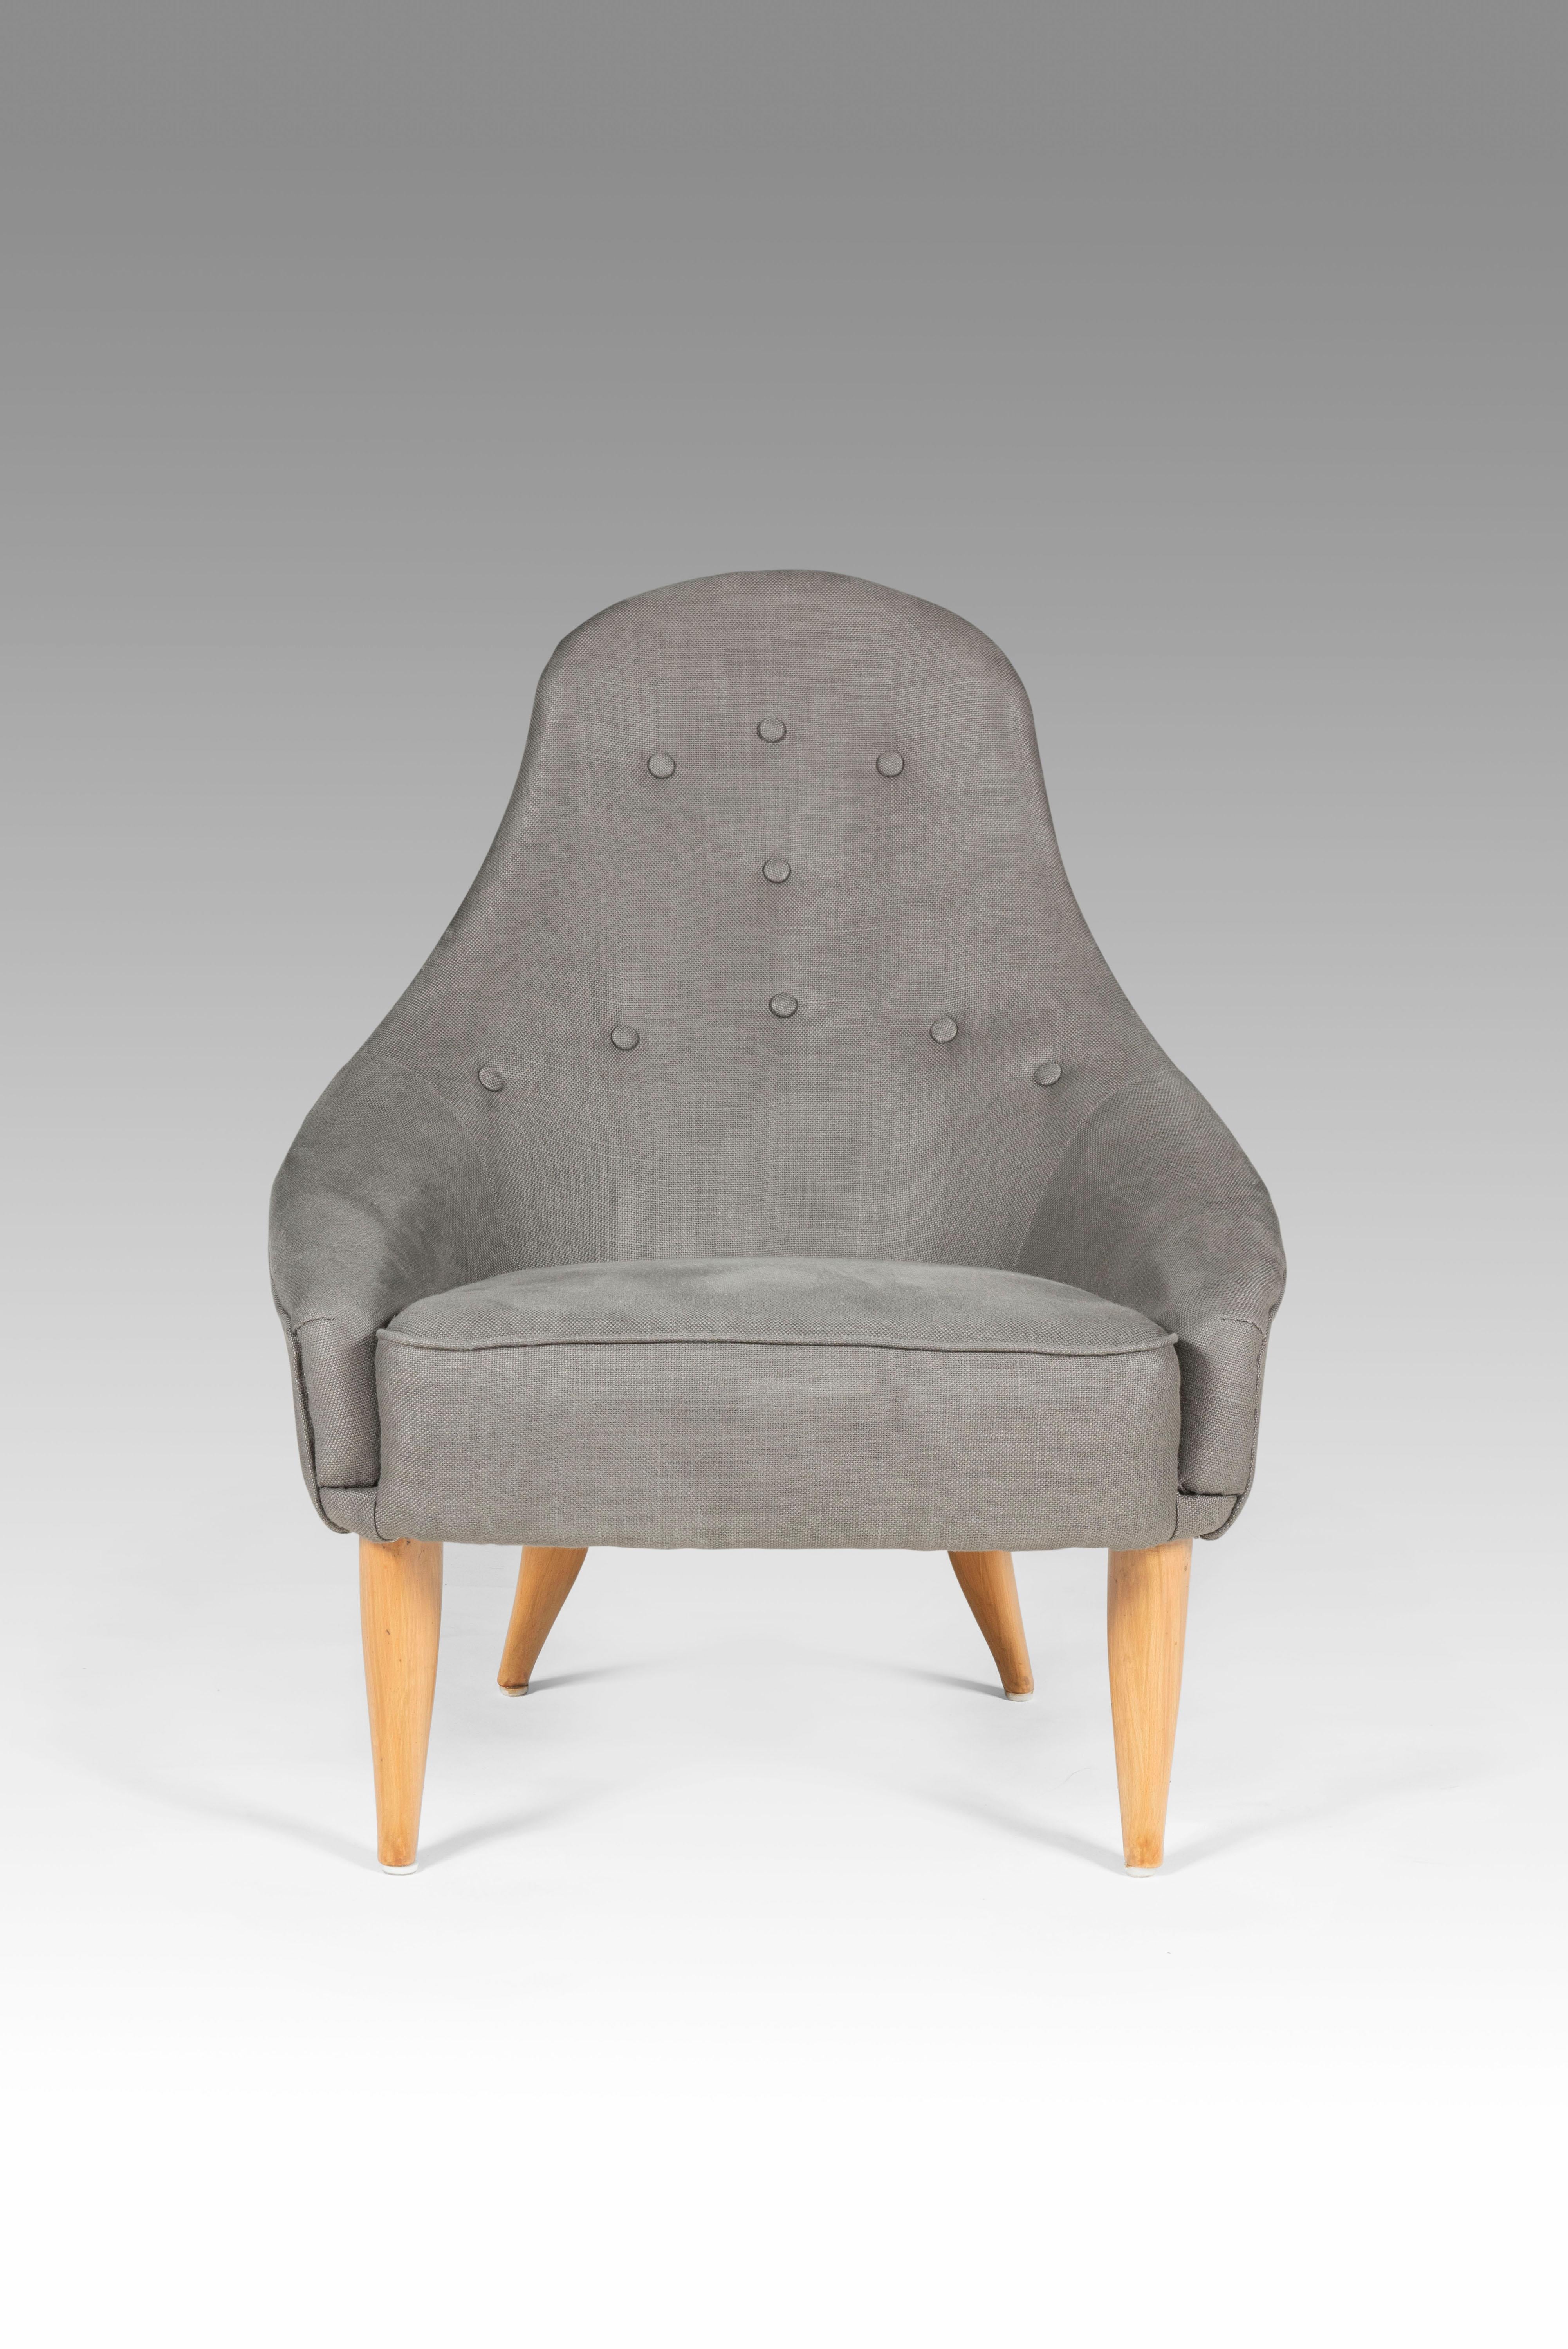 Pair of Little Adam and Little Eva armchairs by Kerstin Hörlin-Holmquist for Nordiska Kompaniet in beech and Linen/synthetic grey upholstery. Belongs to the Paradise series, 1950s. Excellent condition, restored and reupholstered.